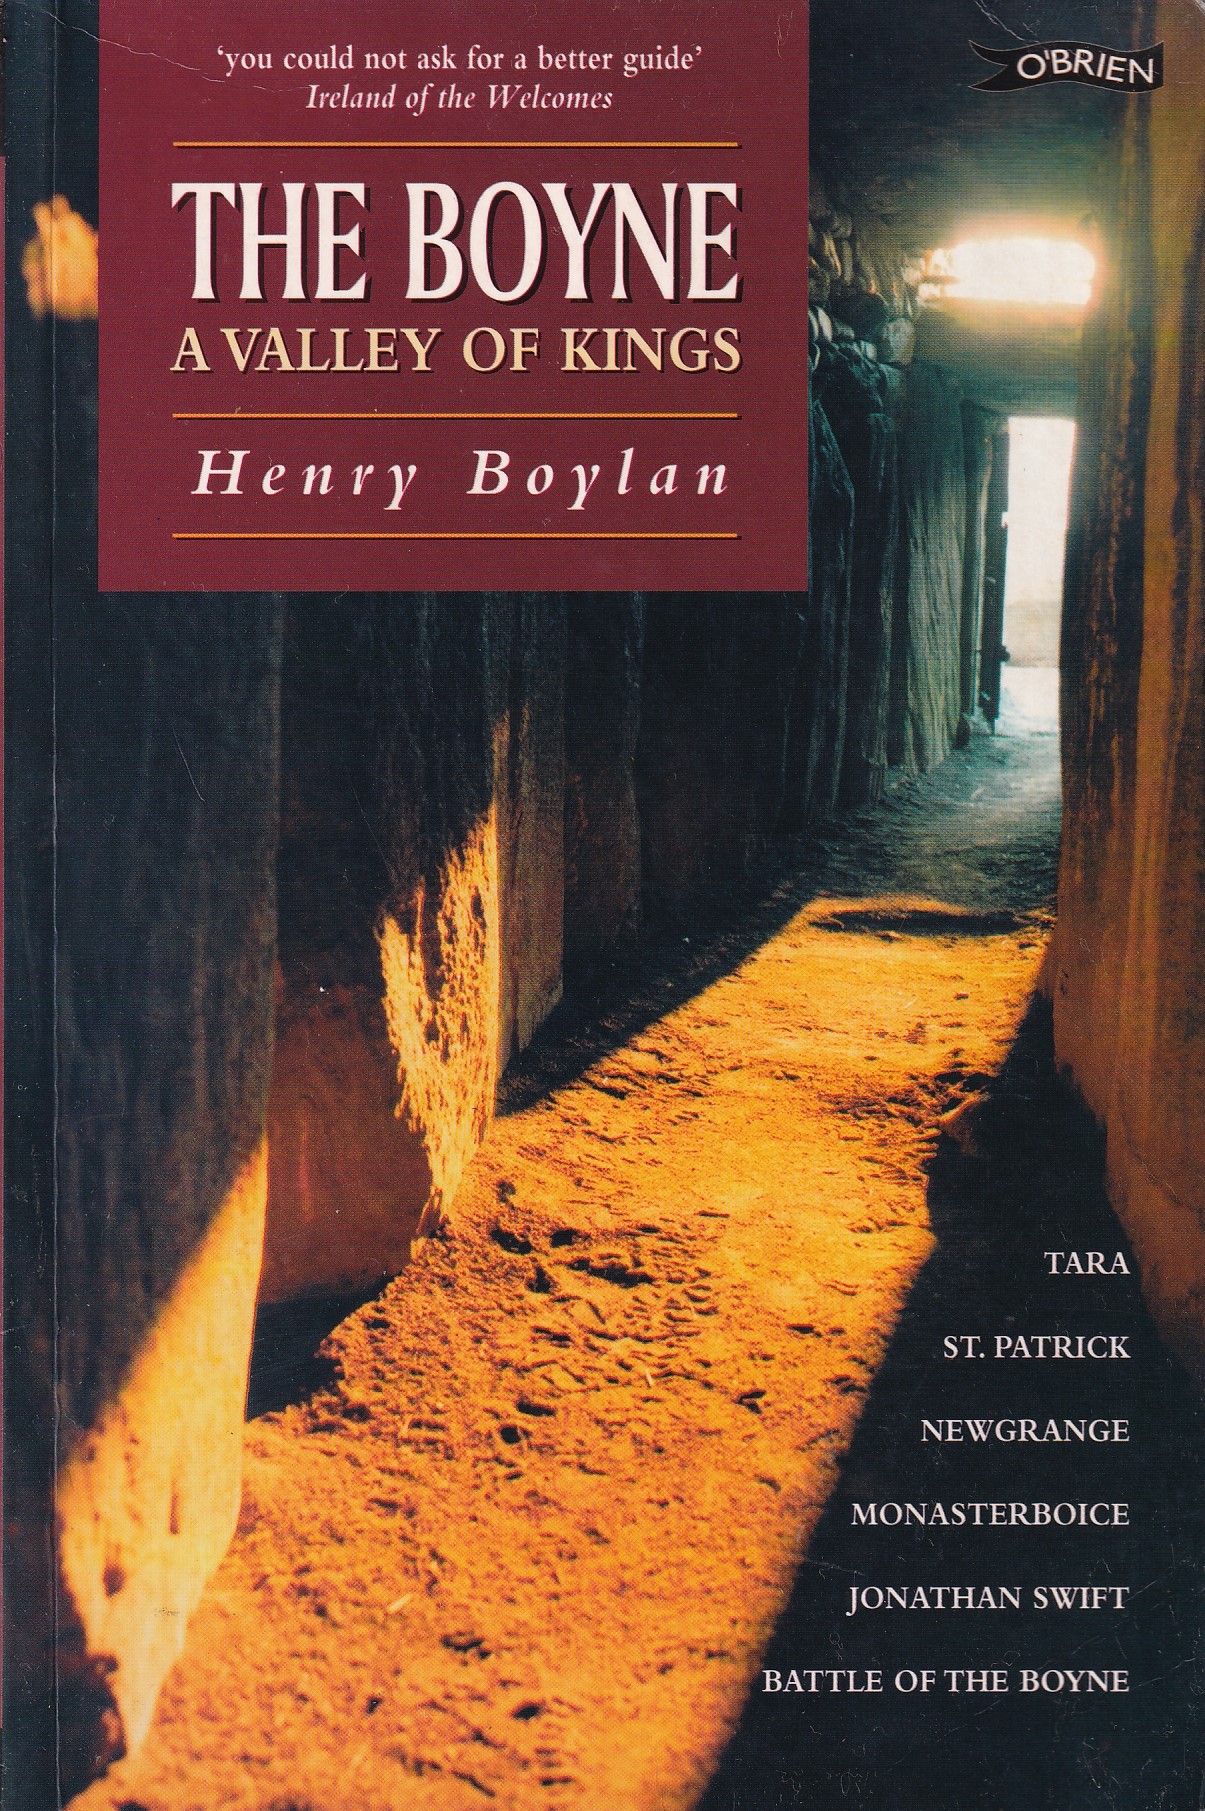 The Boyne: A Valley of Kings by Henry Boylan